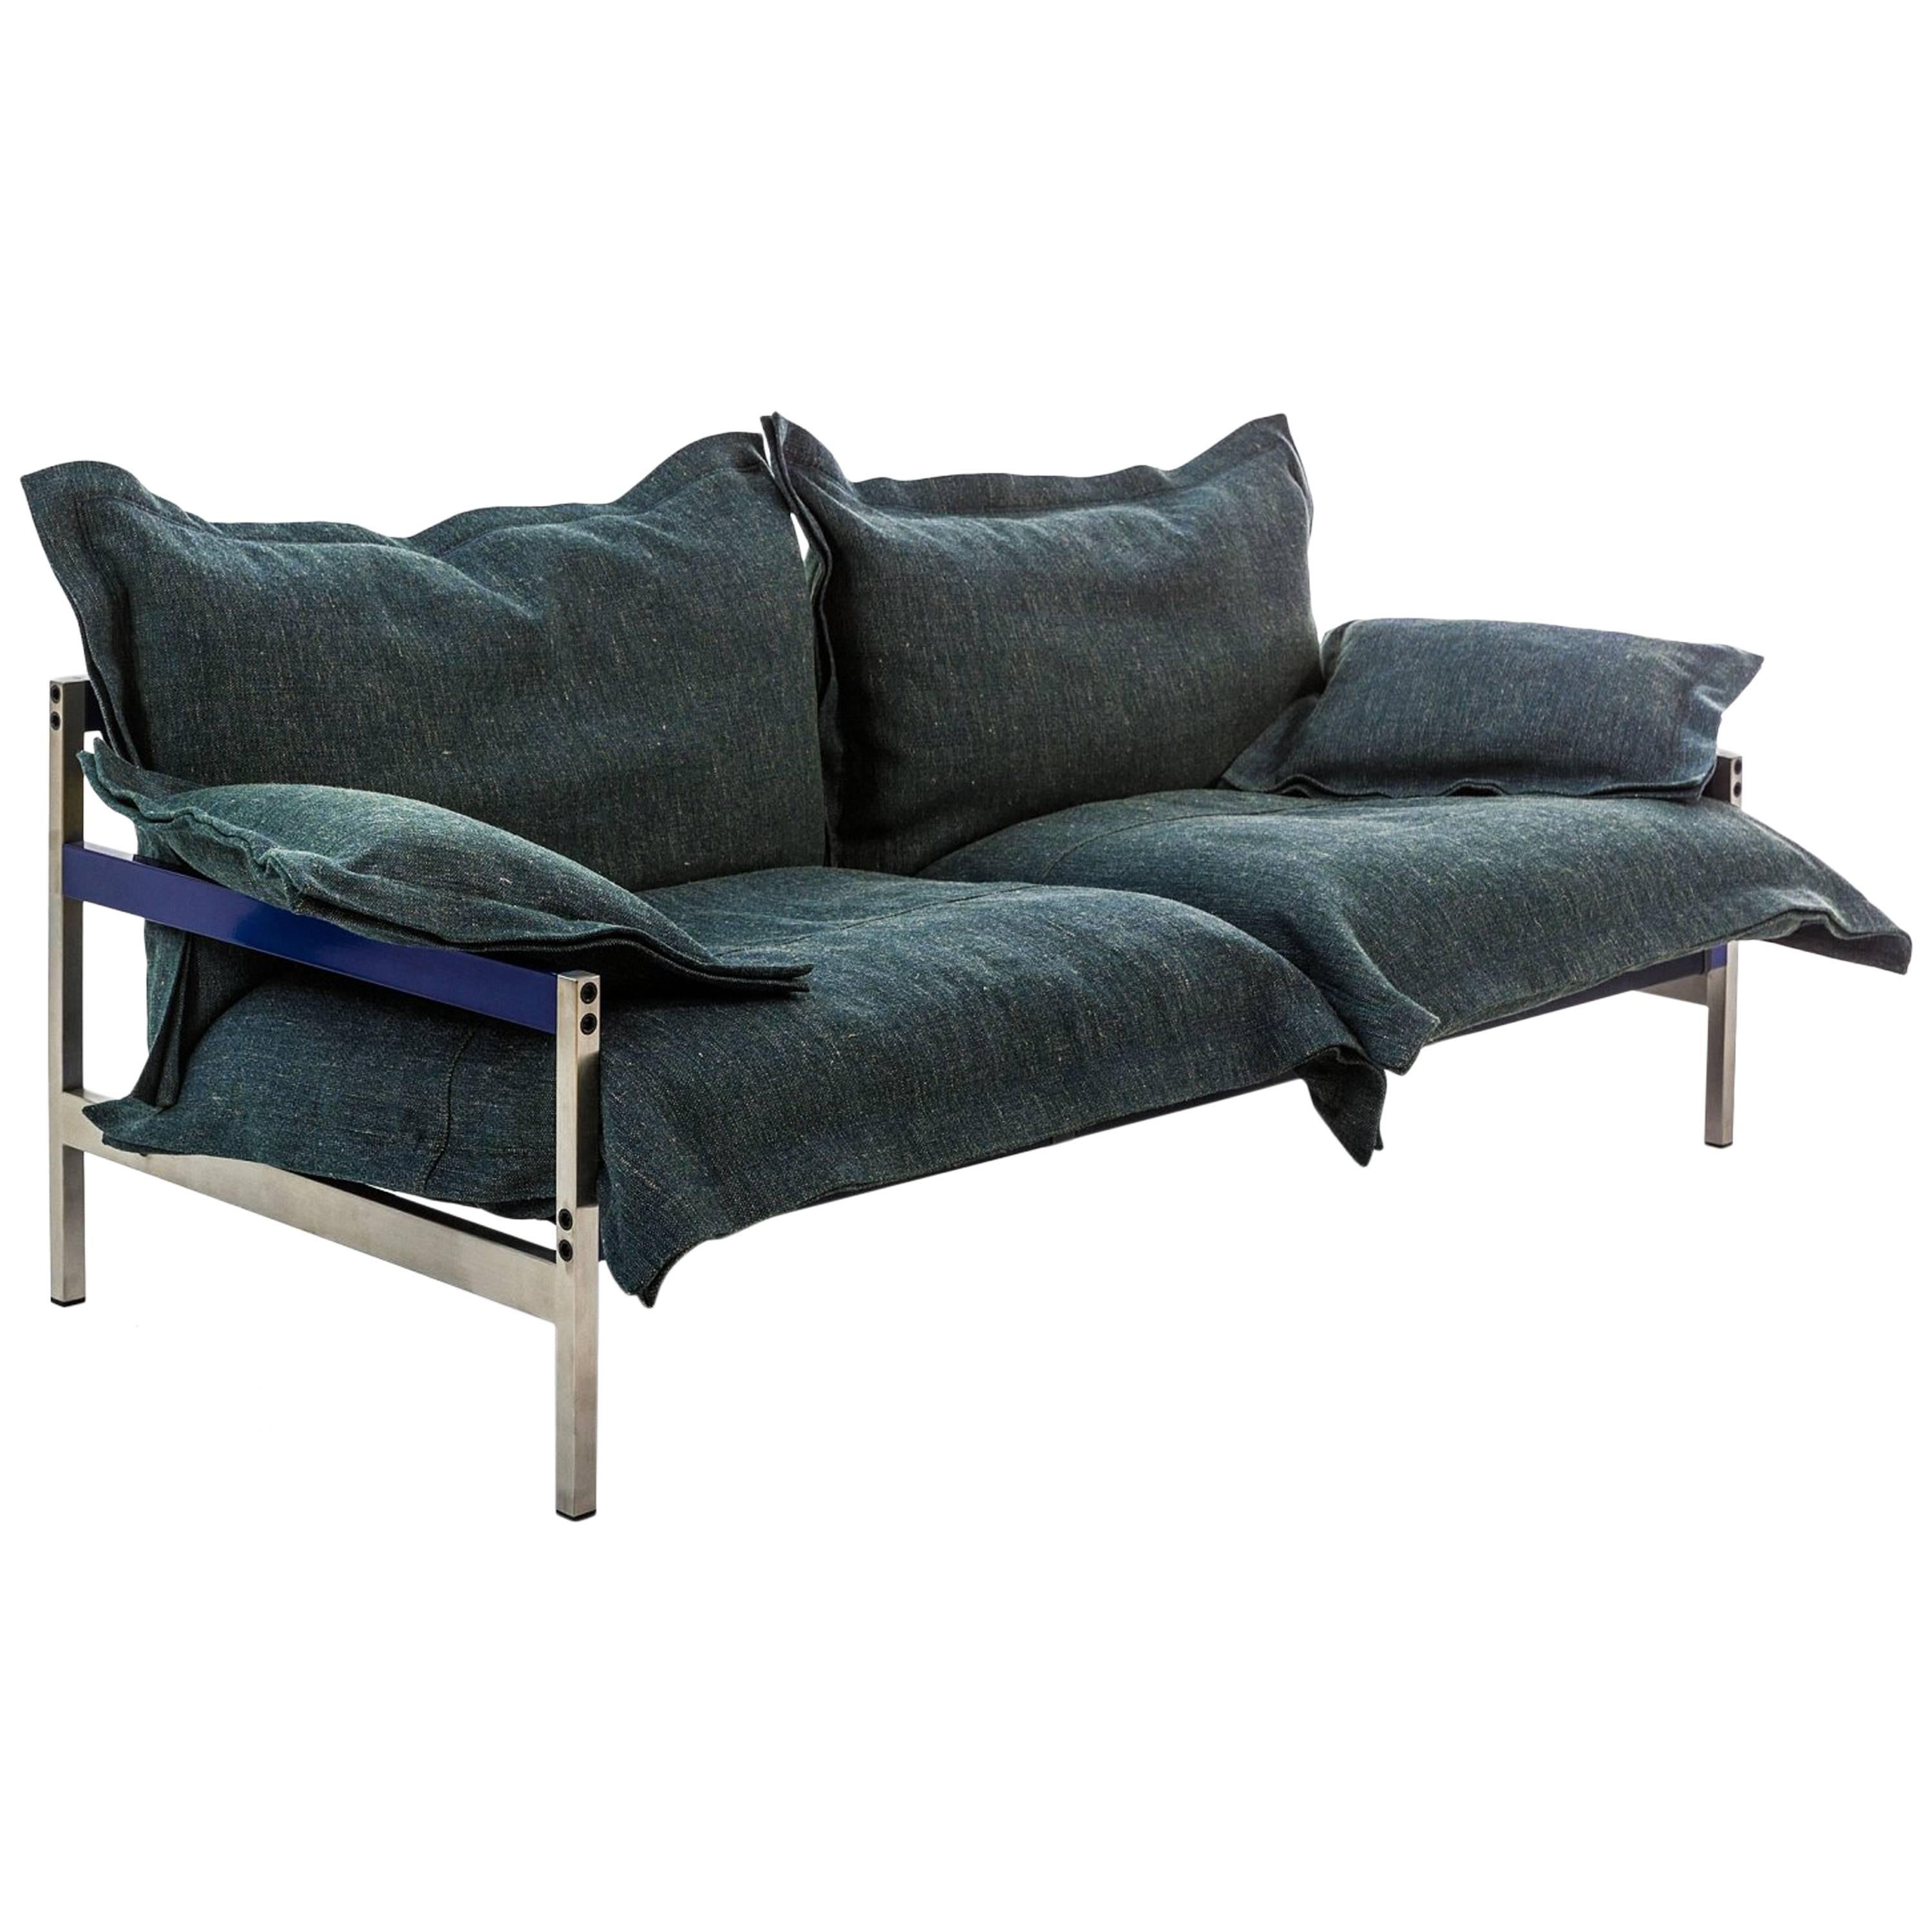 "Iron Maiden" Three-Seat Upholstered Sofa with Steel Frame by Moroso for Diesel For Sale